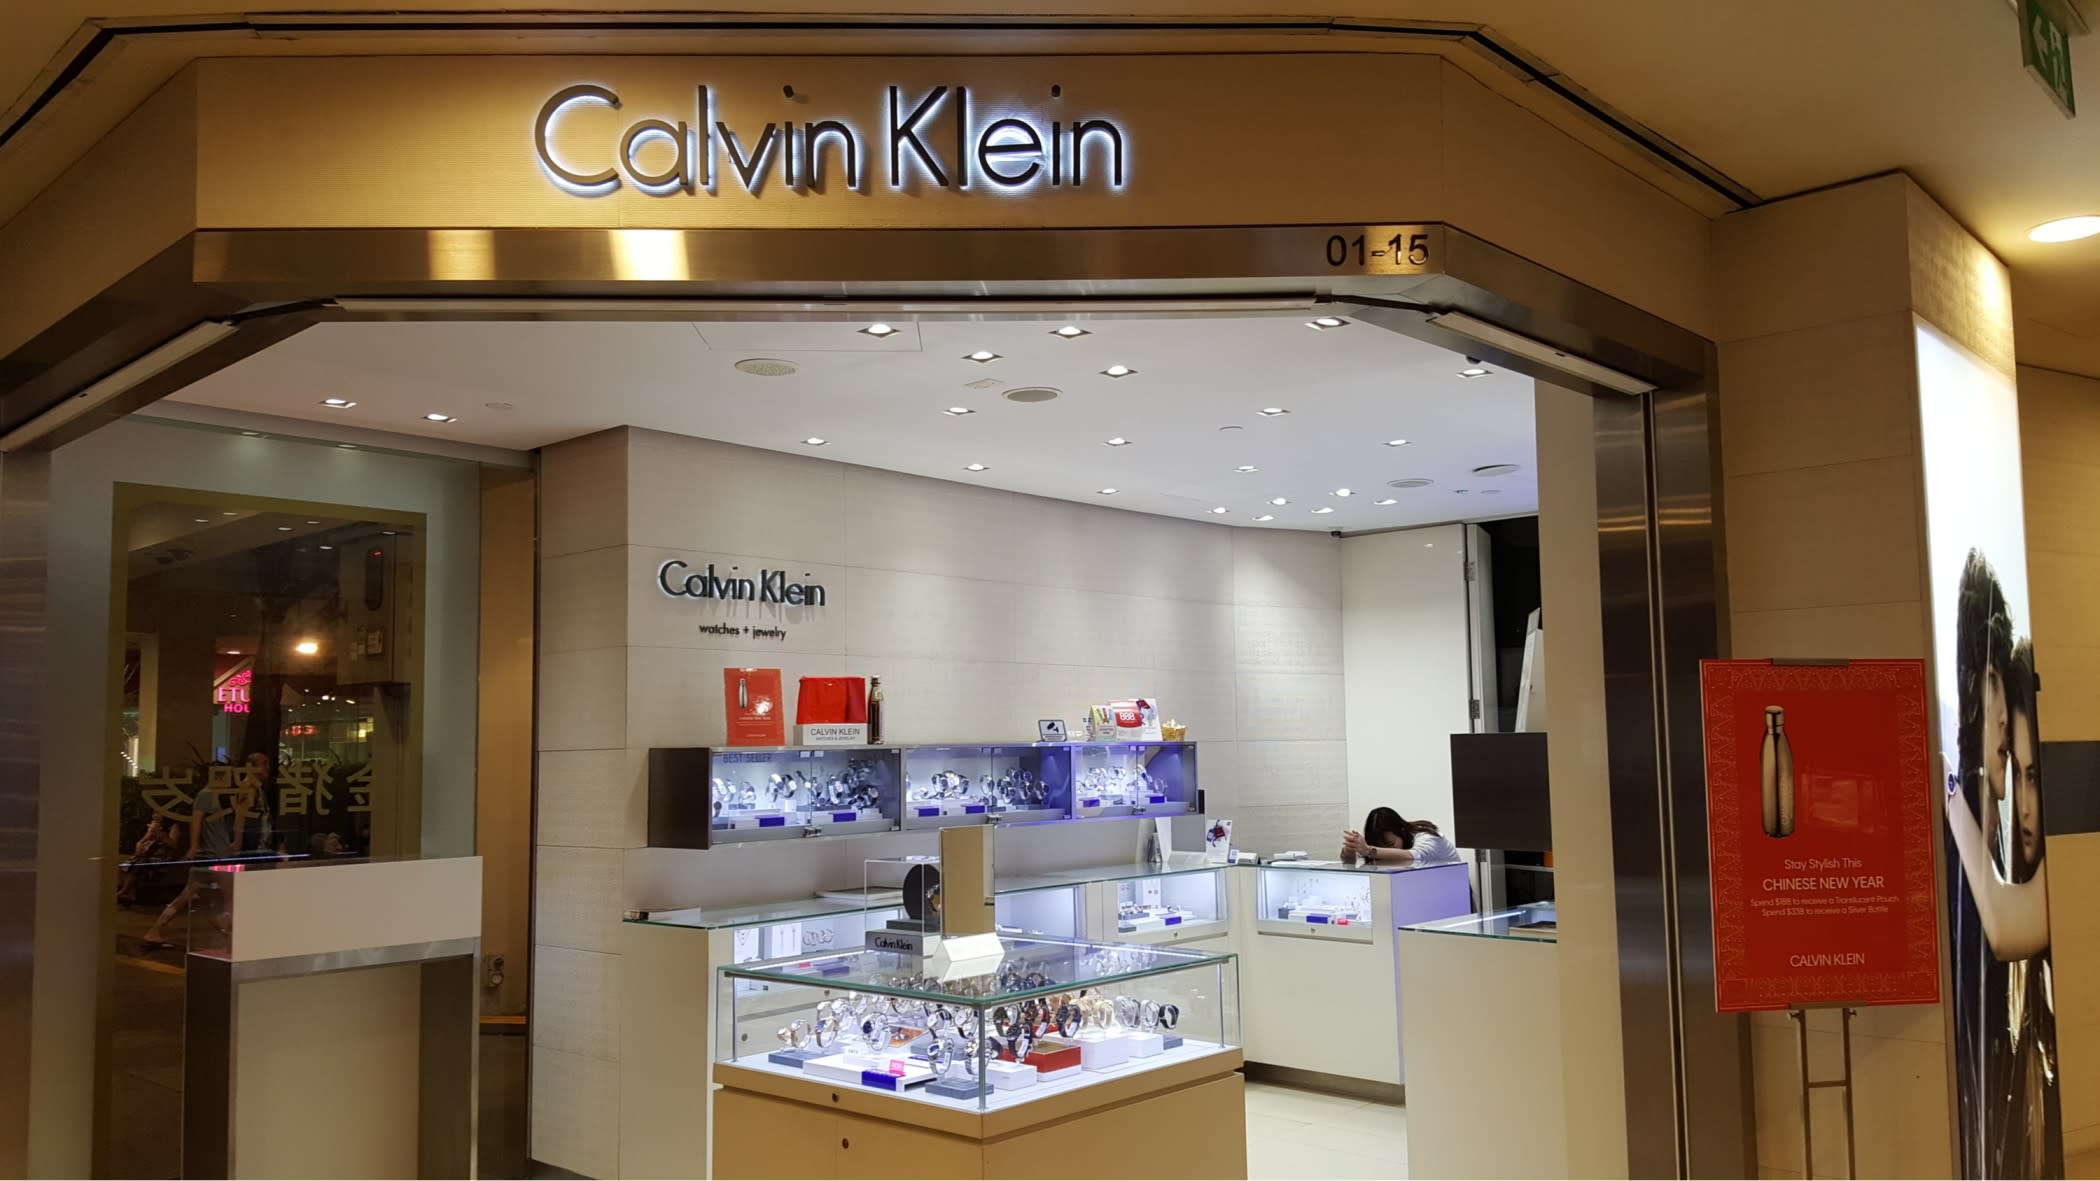 Calvin Klein to launch largest digital campaign to date, The Work